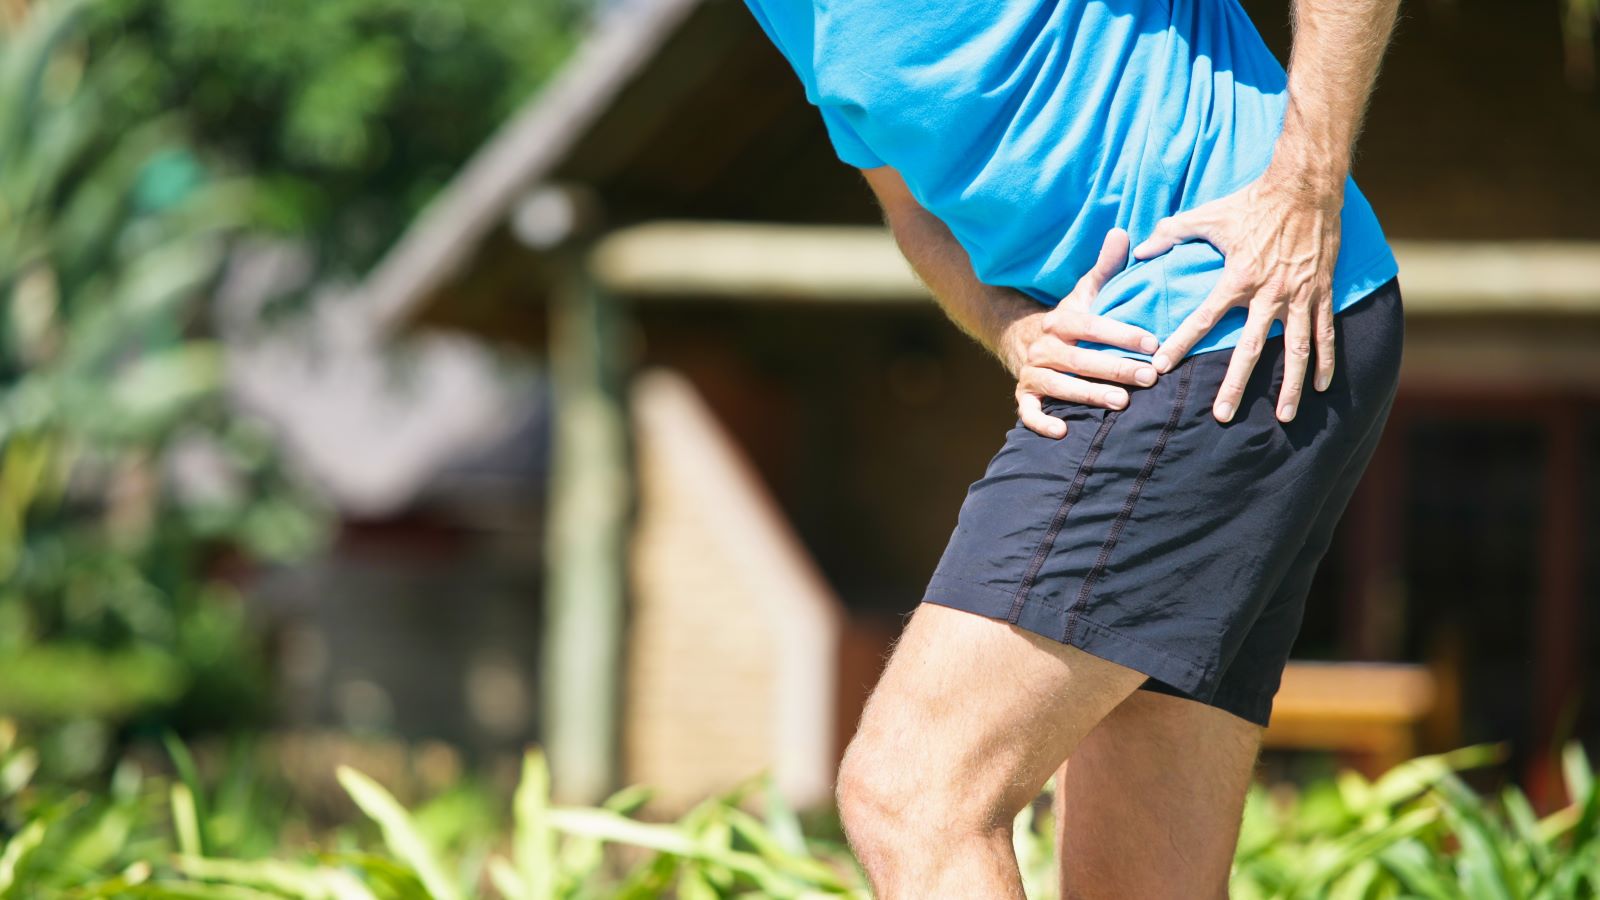 Wondering what the signs are that you need a hip replacement? According to one expert, it starts with this checklist.